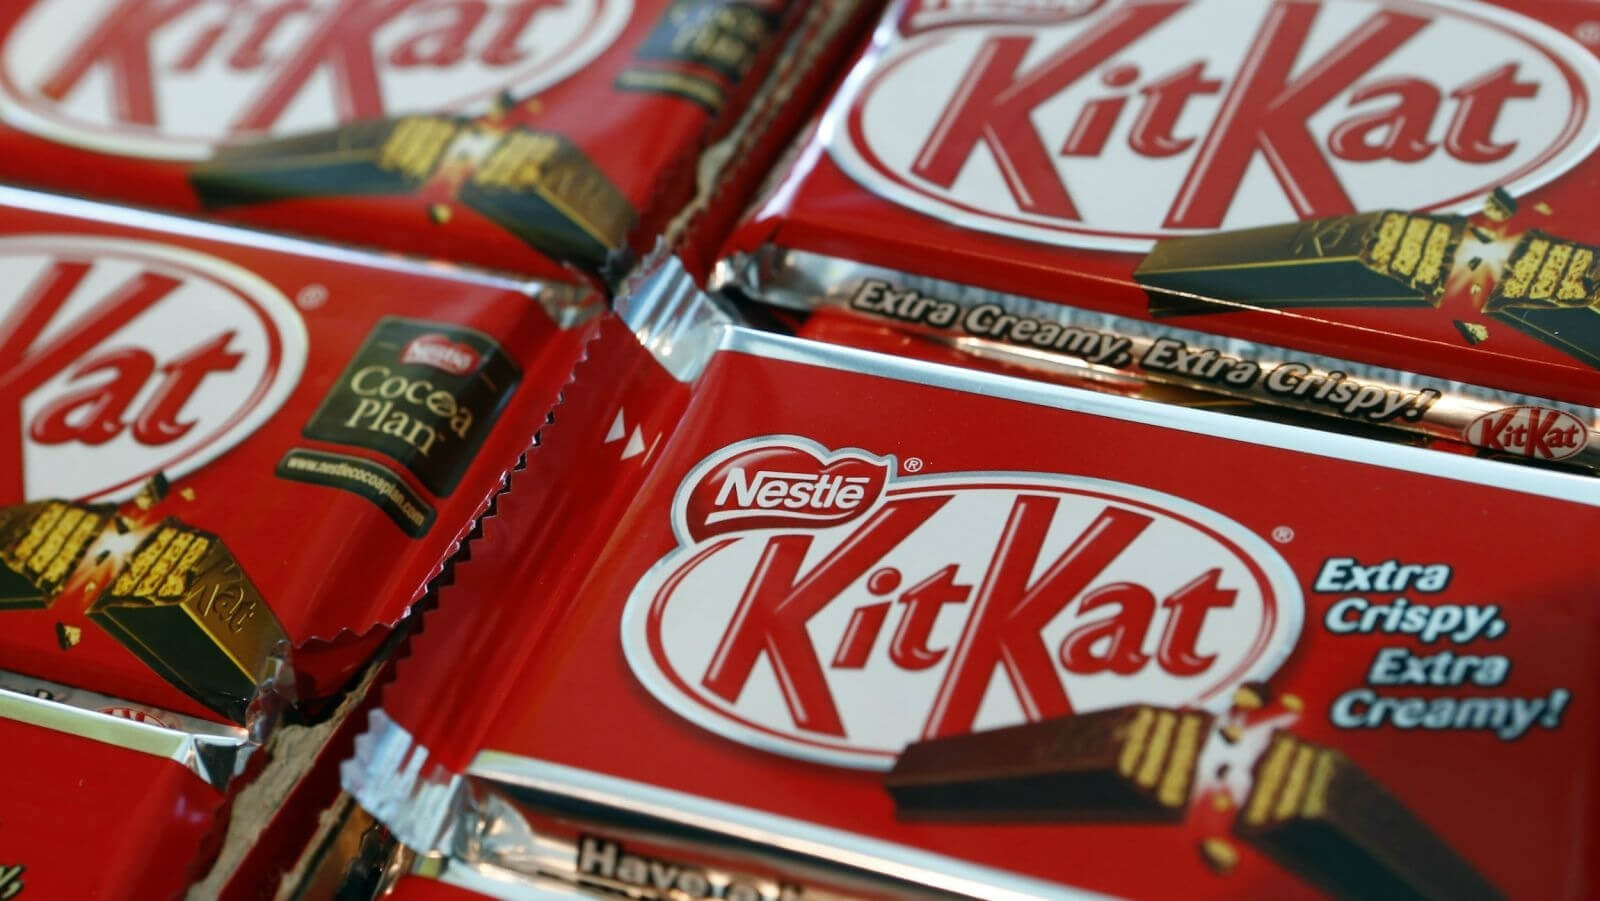 Atari sues Nestle over accusations it copied Breakout game in Kit Kat ads